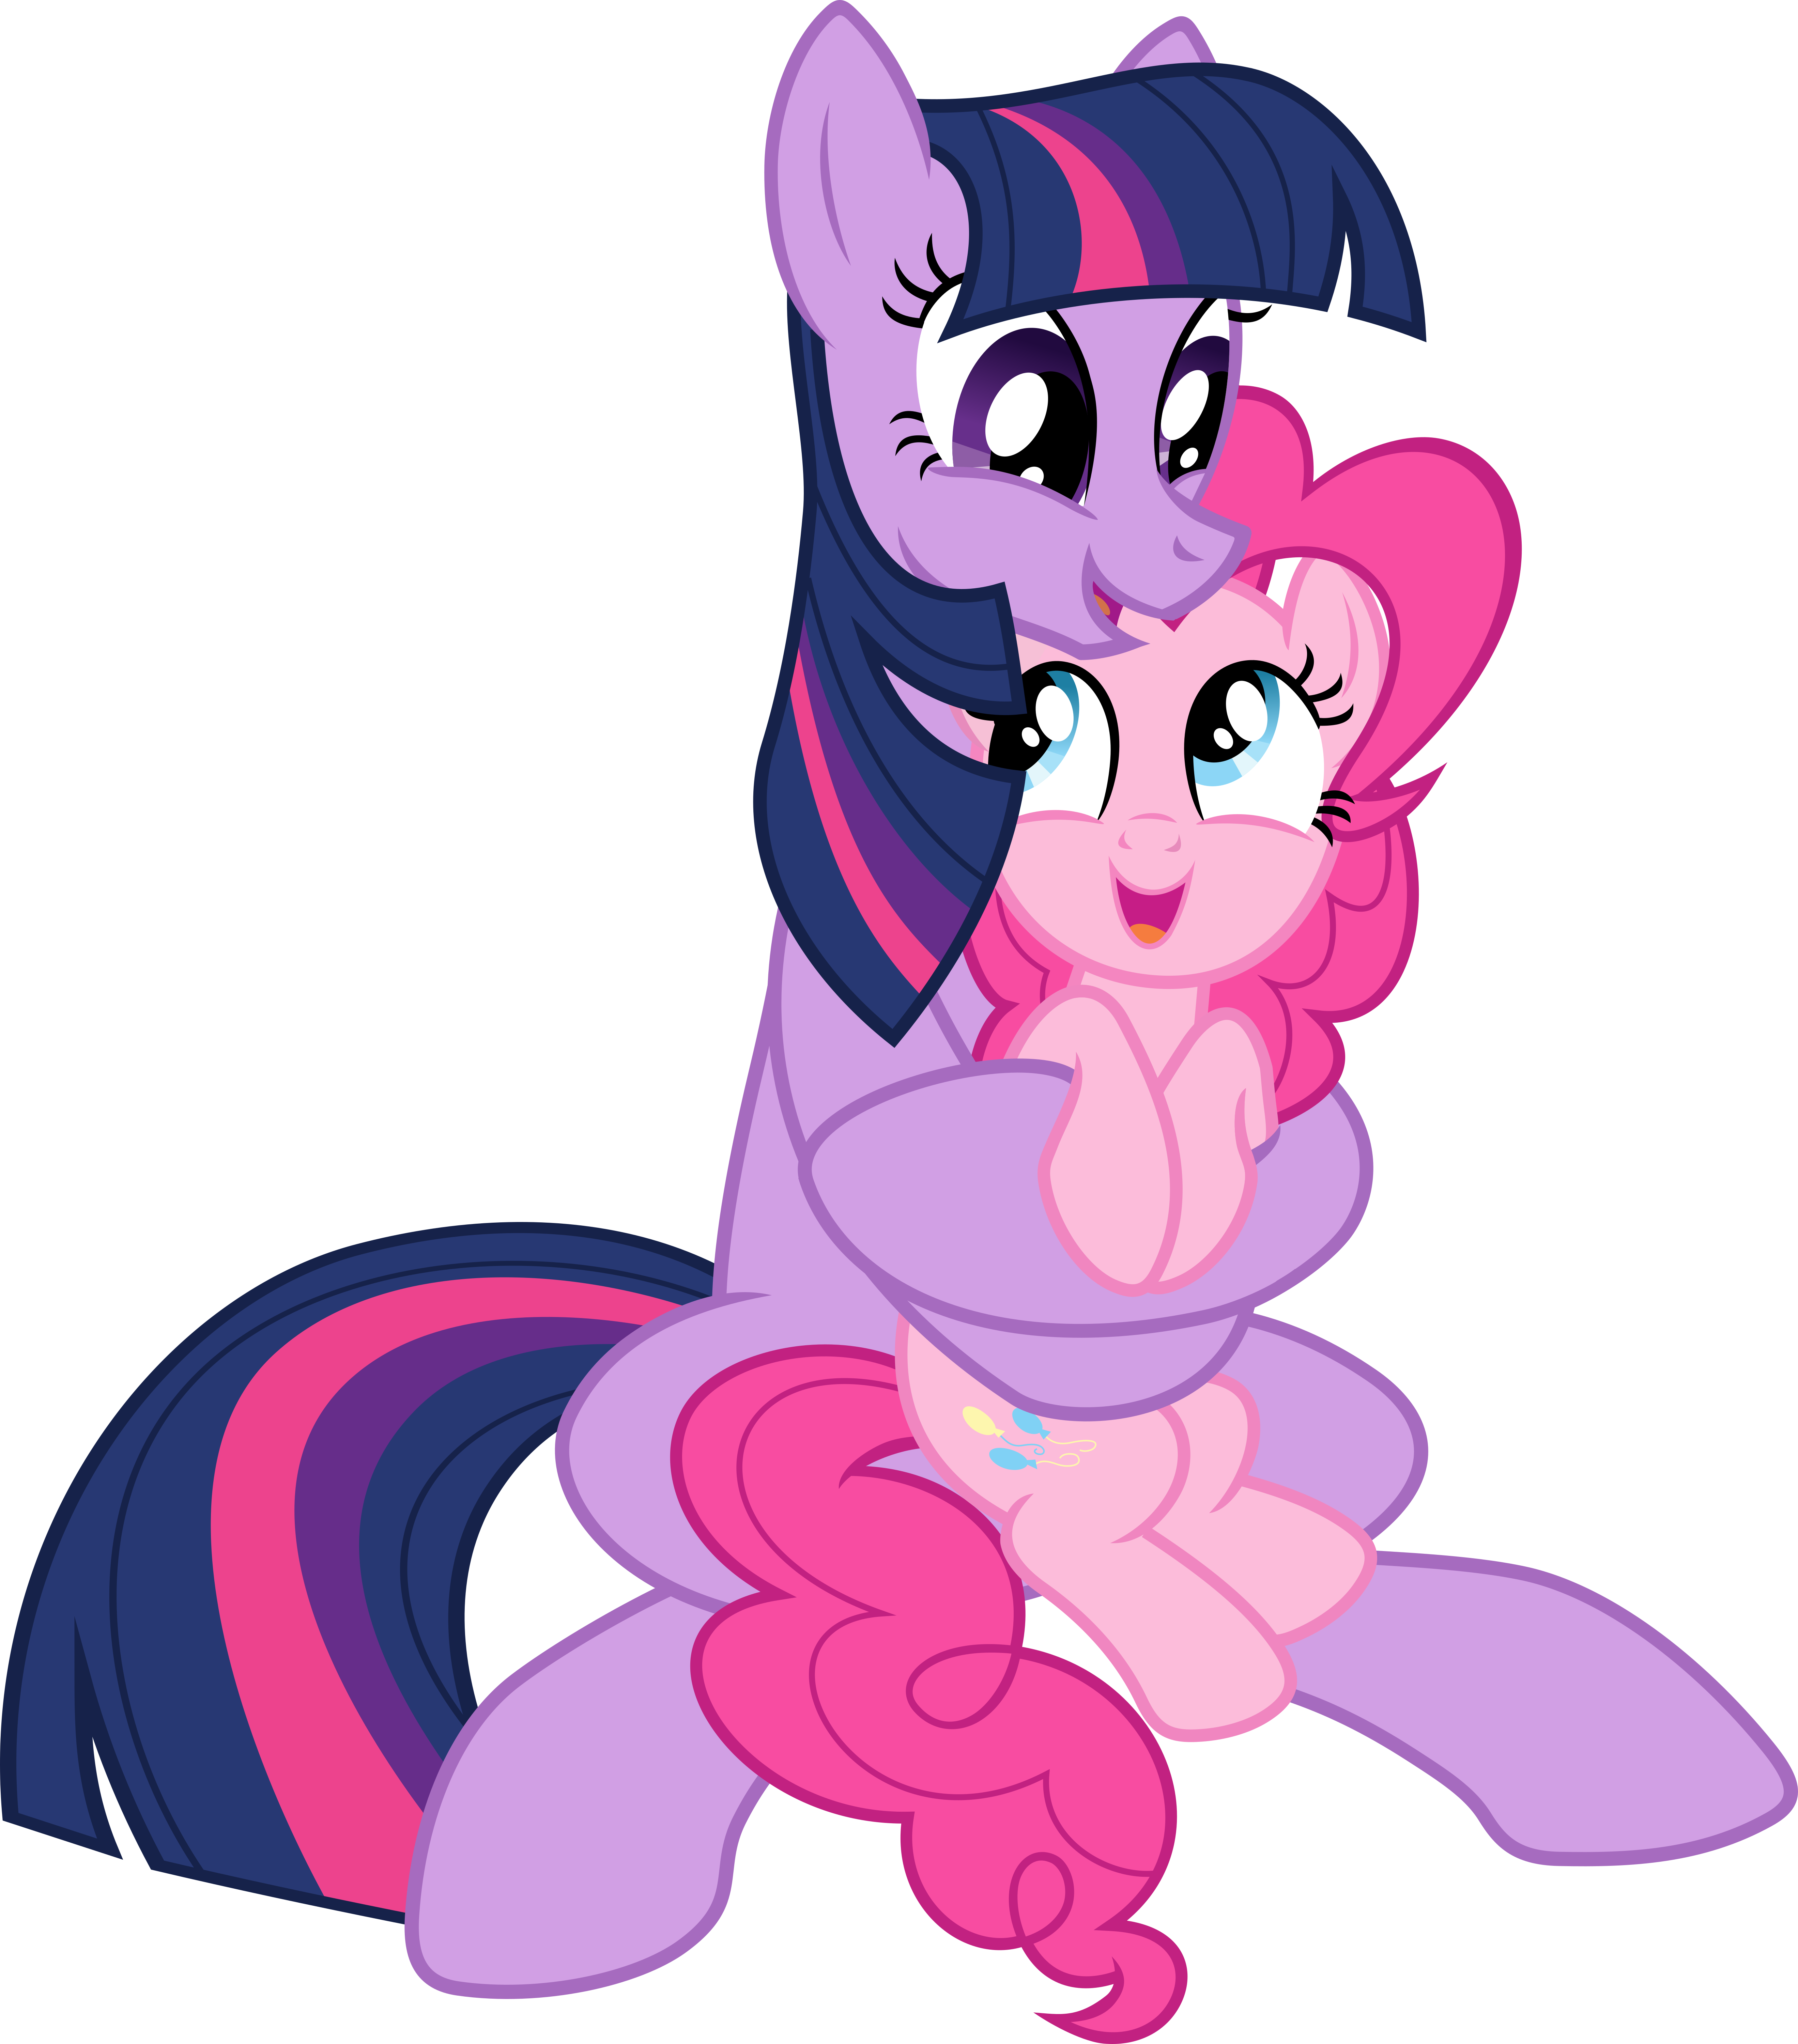 1429912__safe_artist-colon-magister39_pinkie+pie_twilight+sparkle_duo_earth+pony_hug_pony_race+swap_simple+background_tall_transparent+background_vecto.png